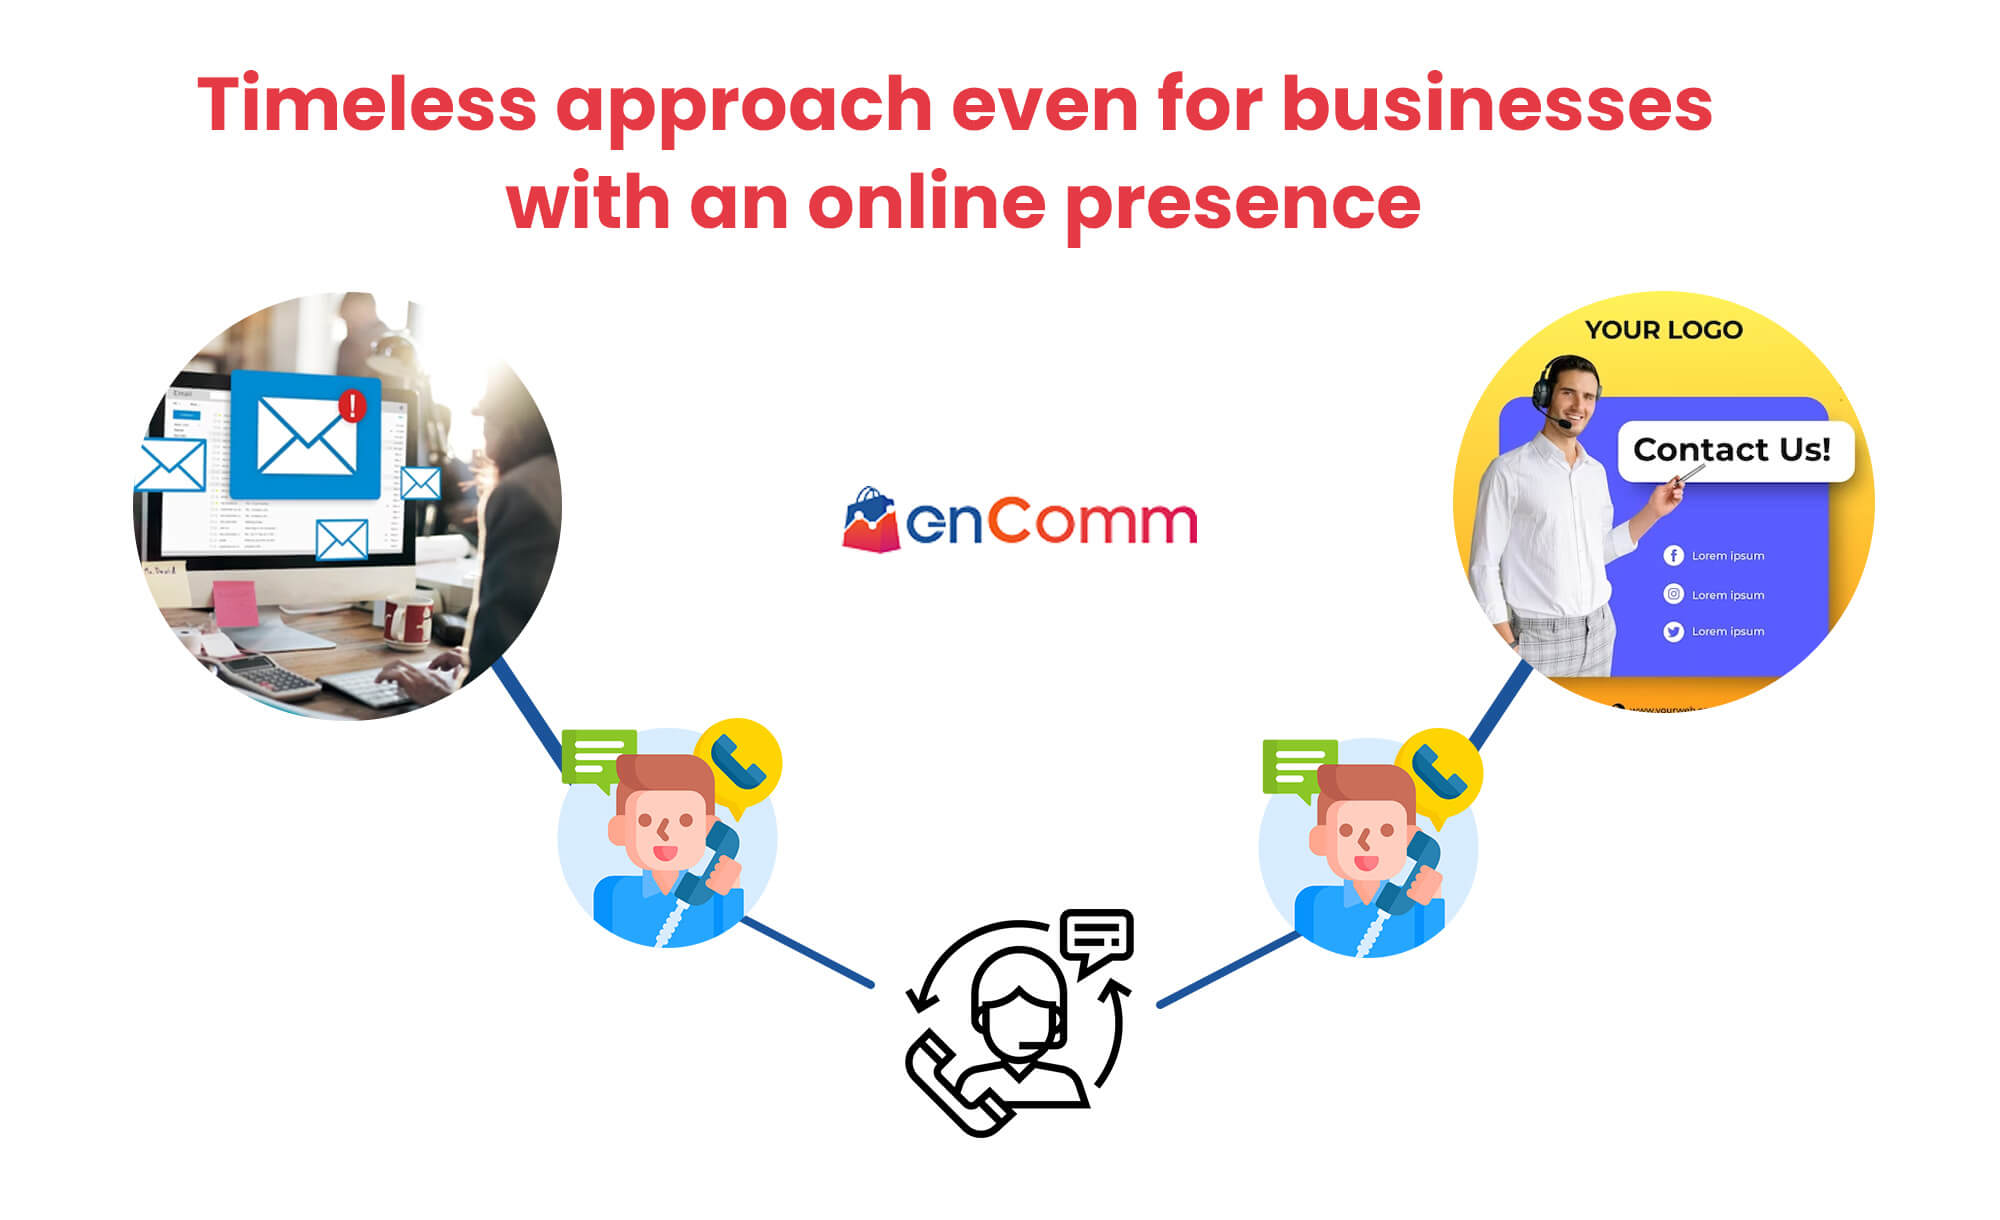 Timeless approach even for businesses with an online presence